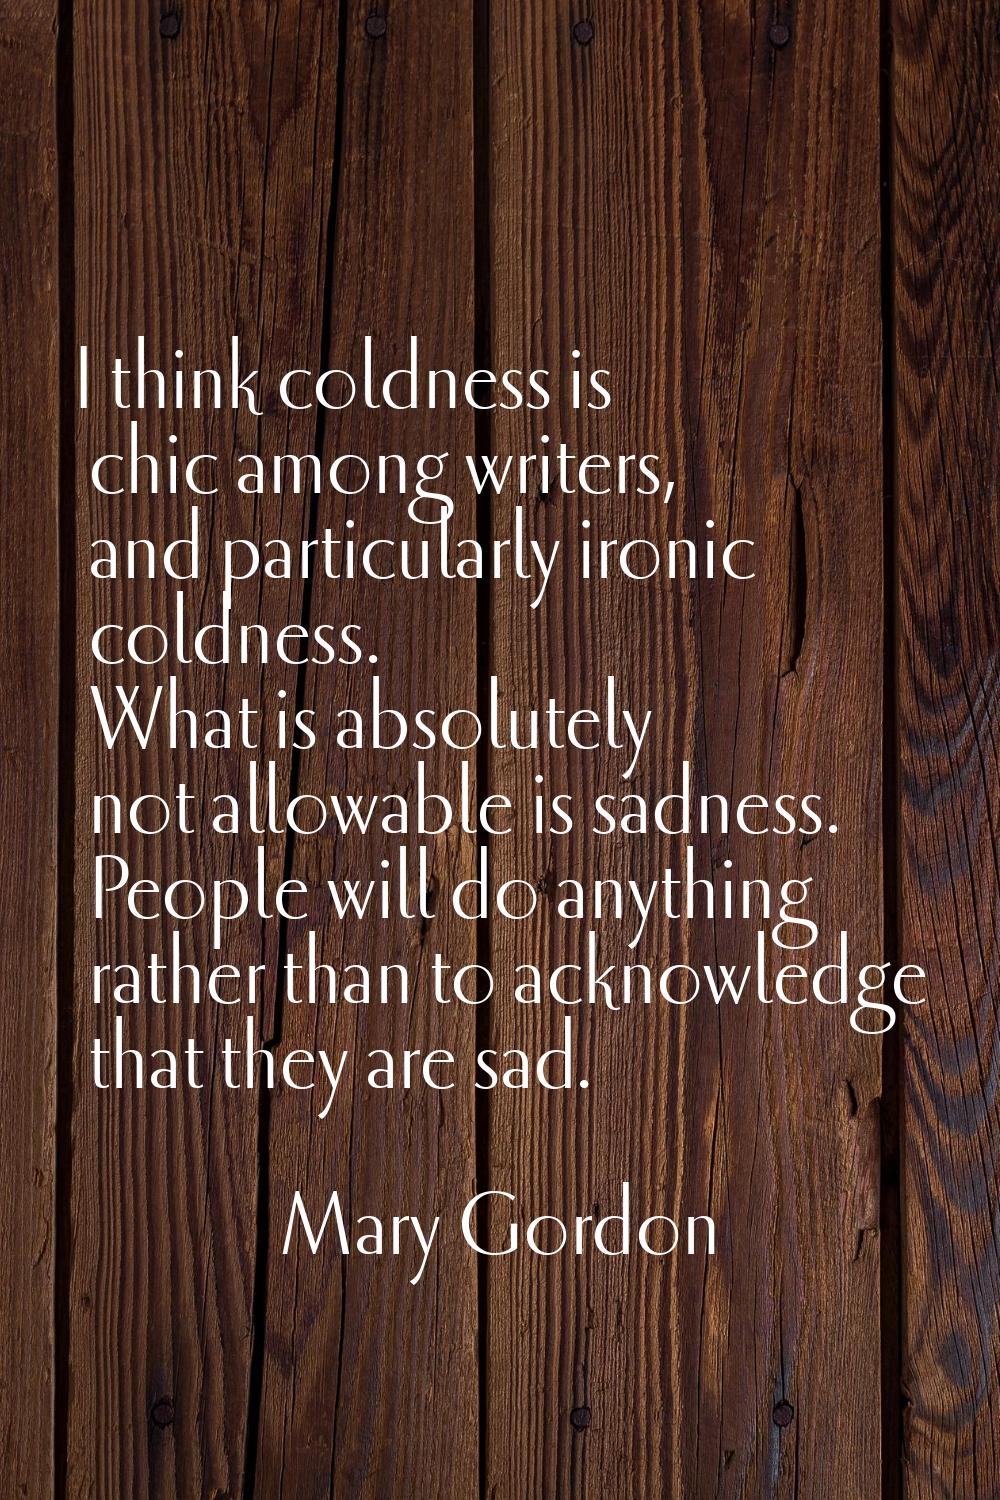 I think coldness is chic among writers, and particularly ironic coldness. What is absolutely not al